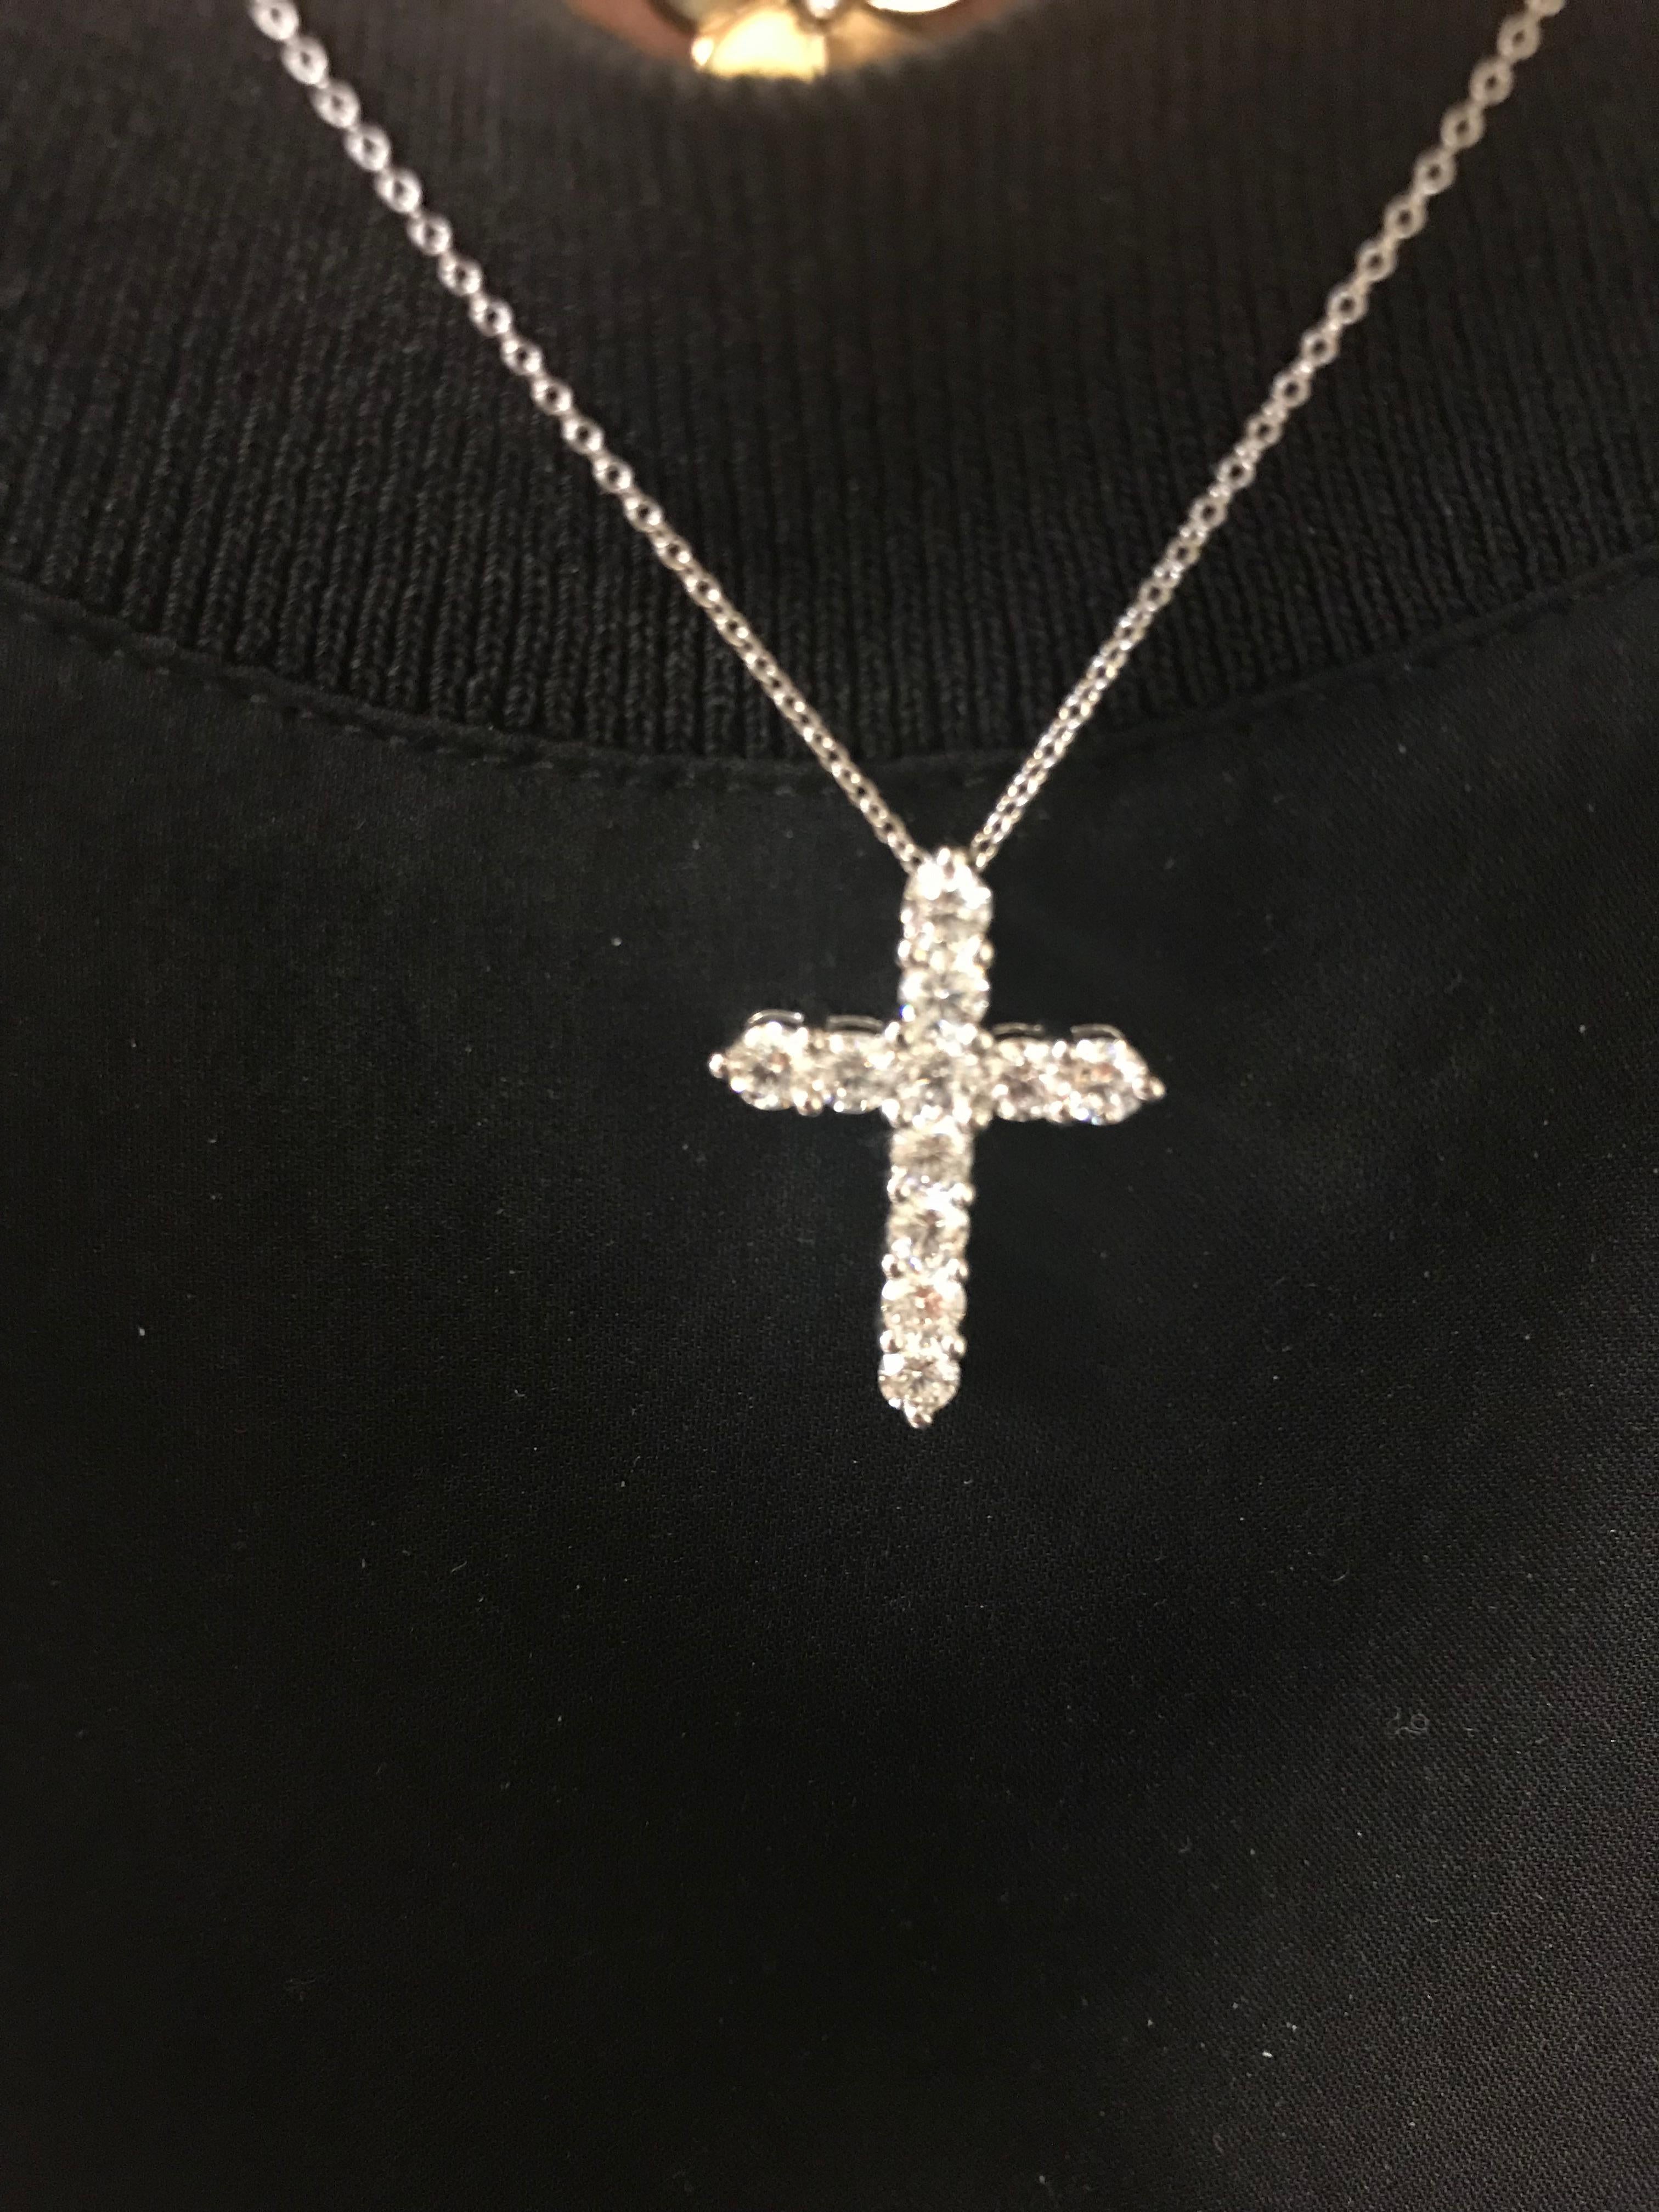 Diamond cross pendant set in 14k white gold. The carat weight is 1.43. The stones are set in a shared prong. The pendant is set with 11 stones, each weighing 0.12-0.13 carats approximately. The color is G, clarity is SI1.